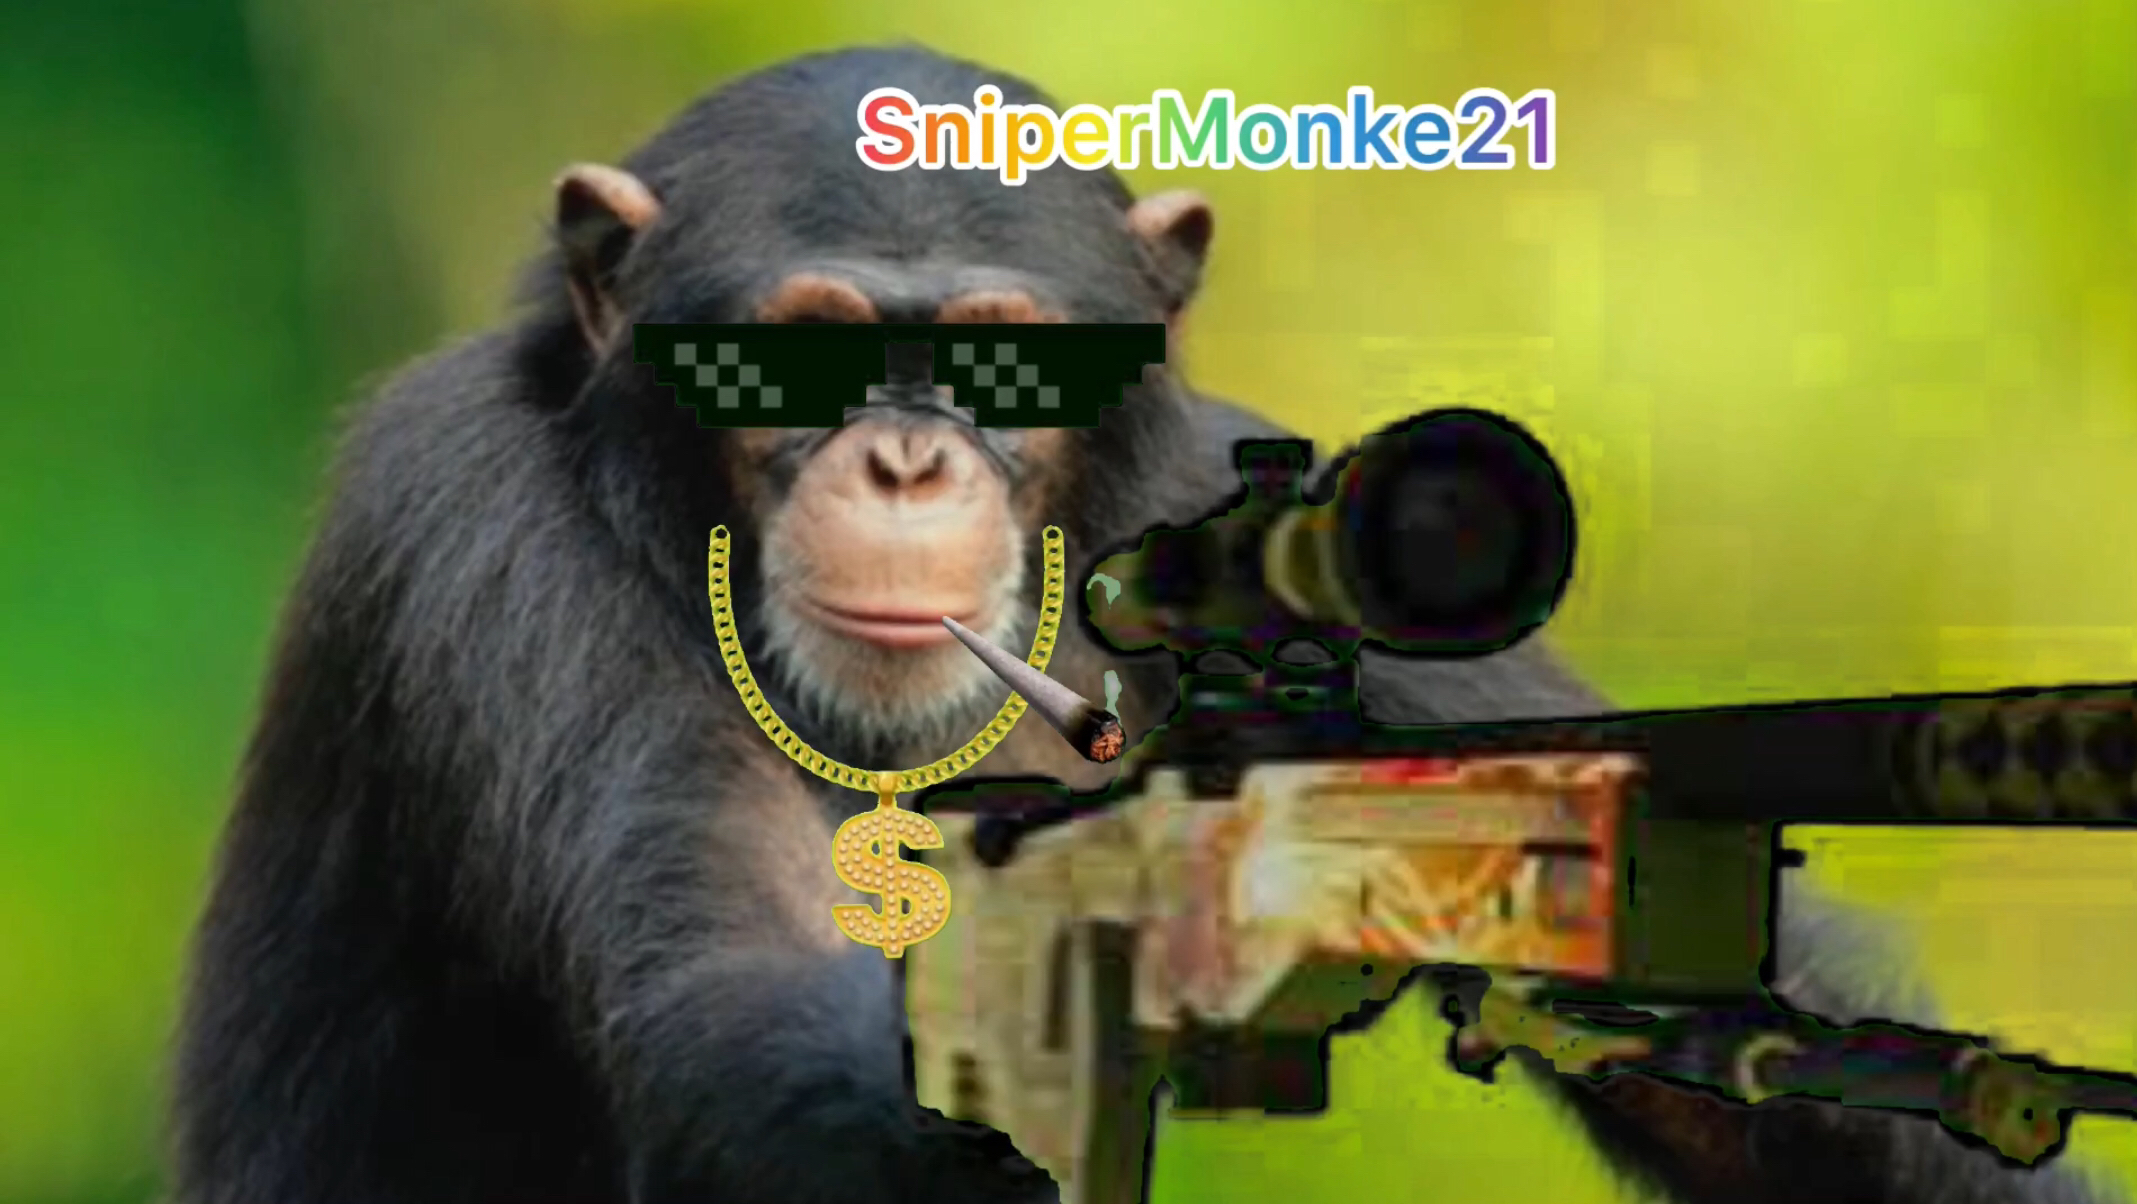 snipermonke21's Profile Picture on PvPRP